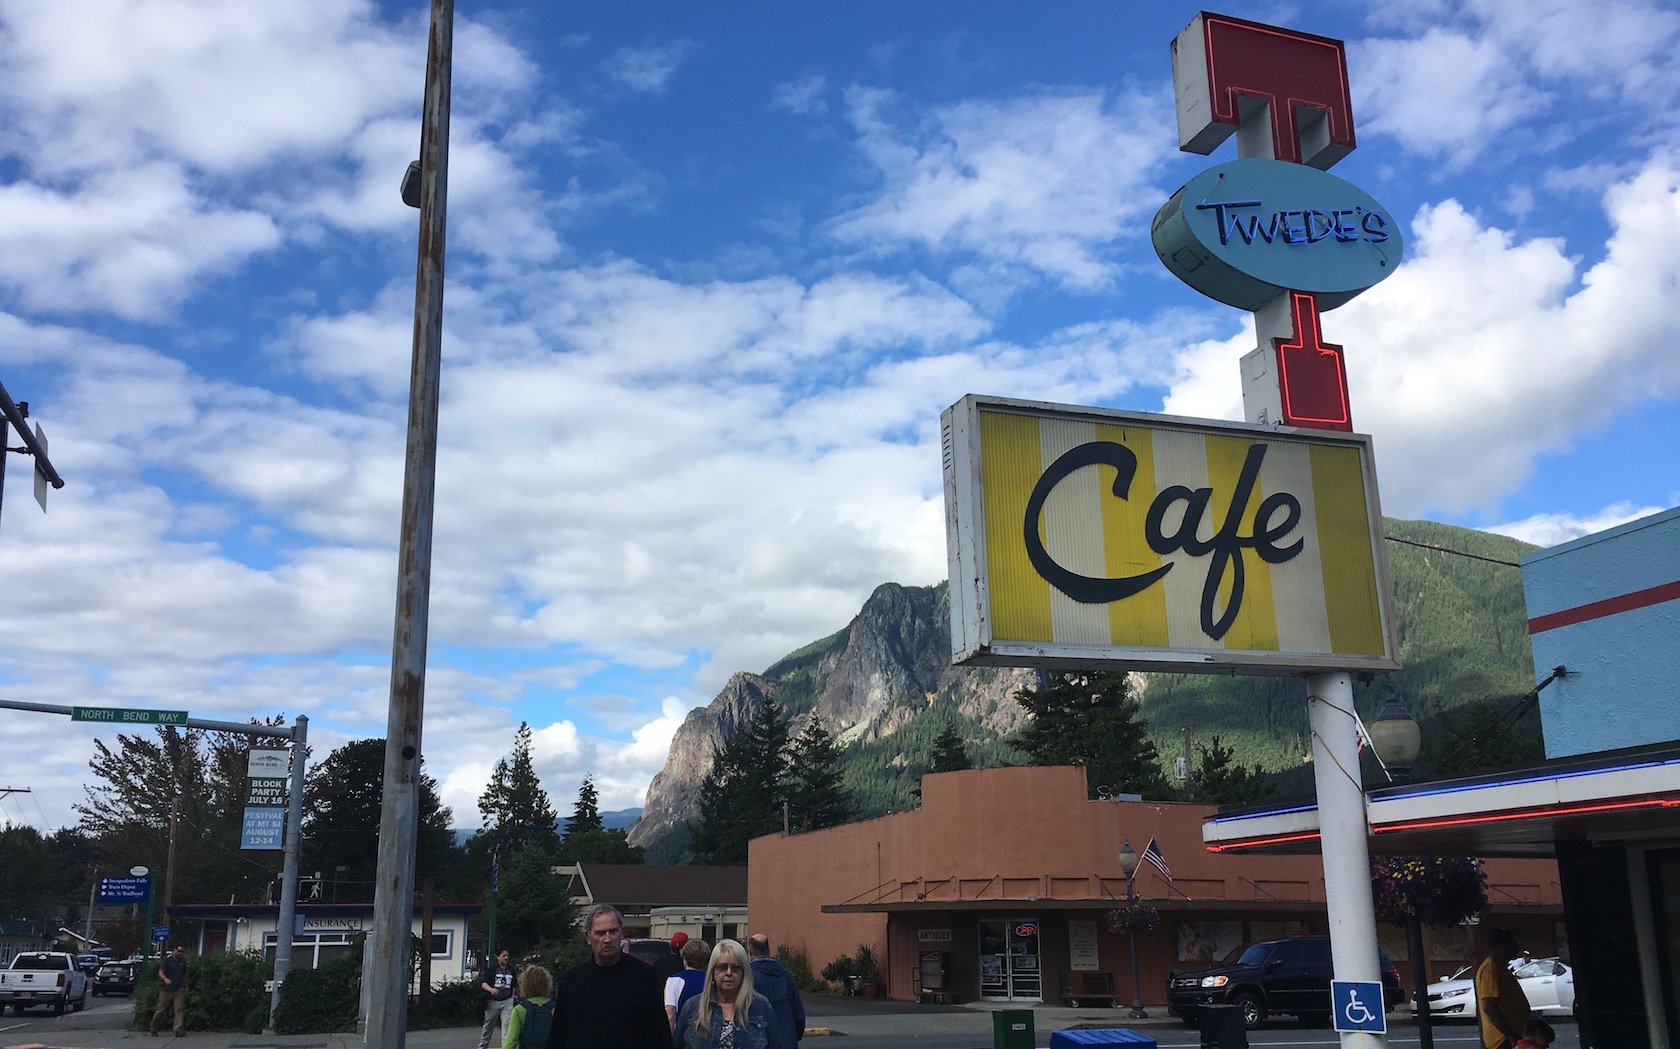 Twede's Cafe aka the Double R Diner